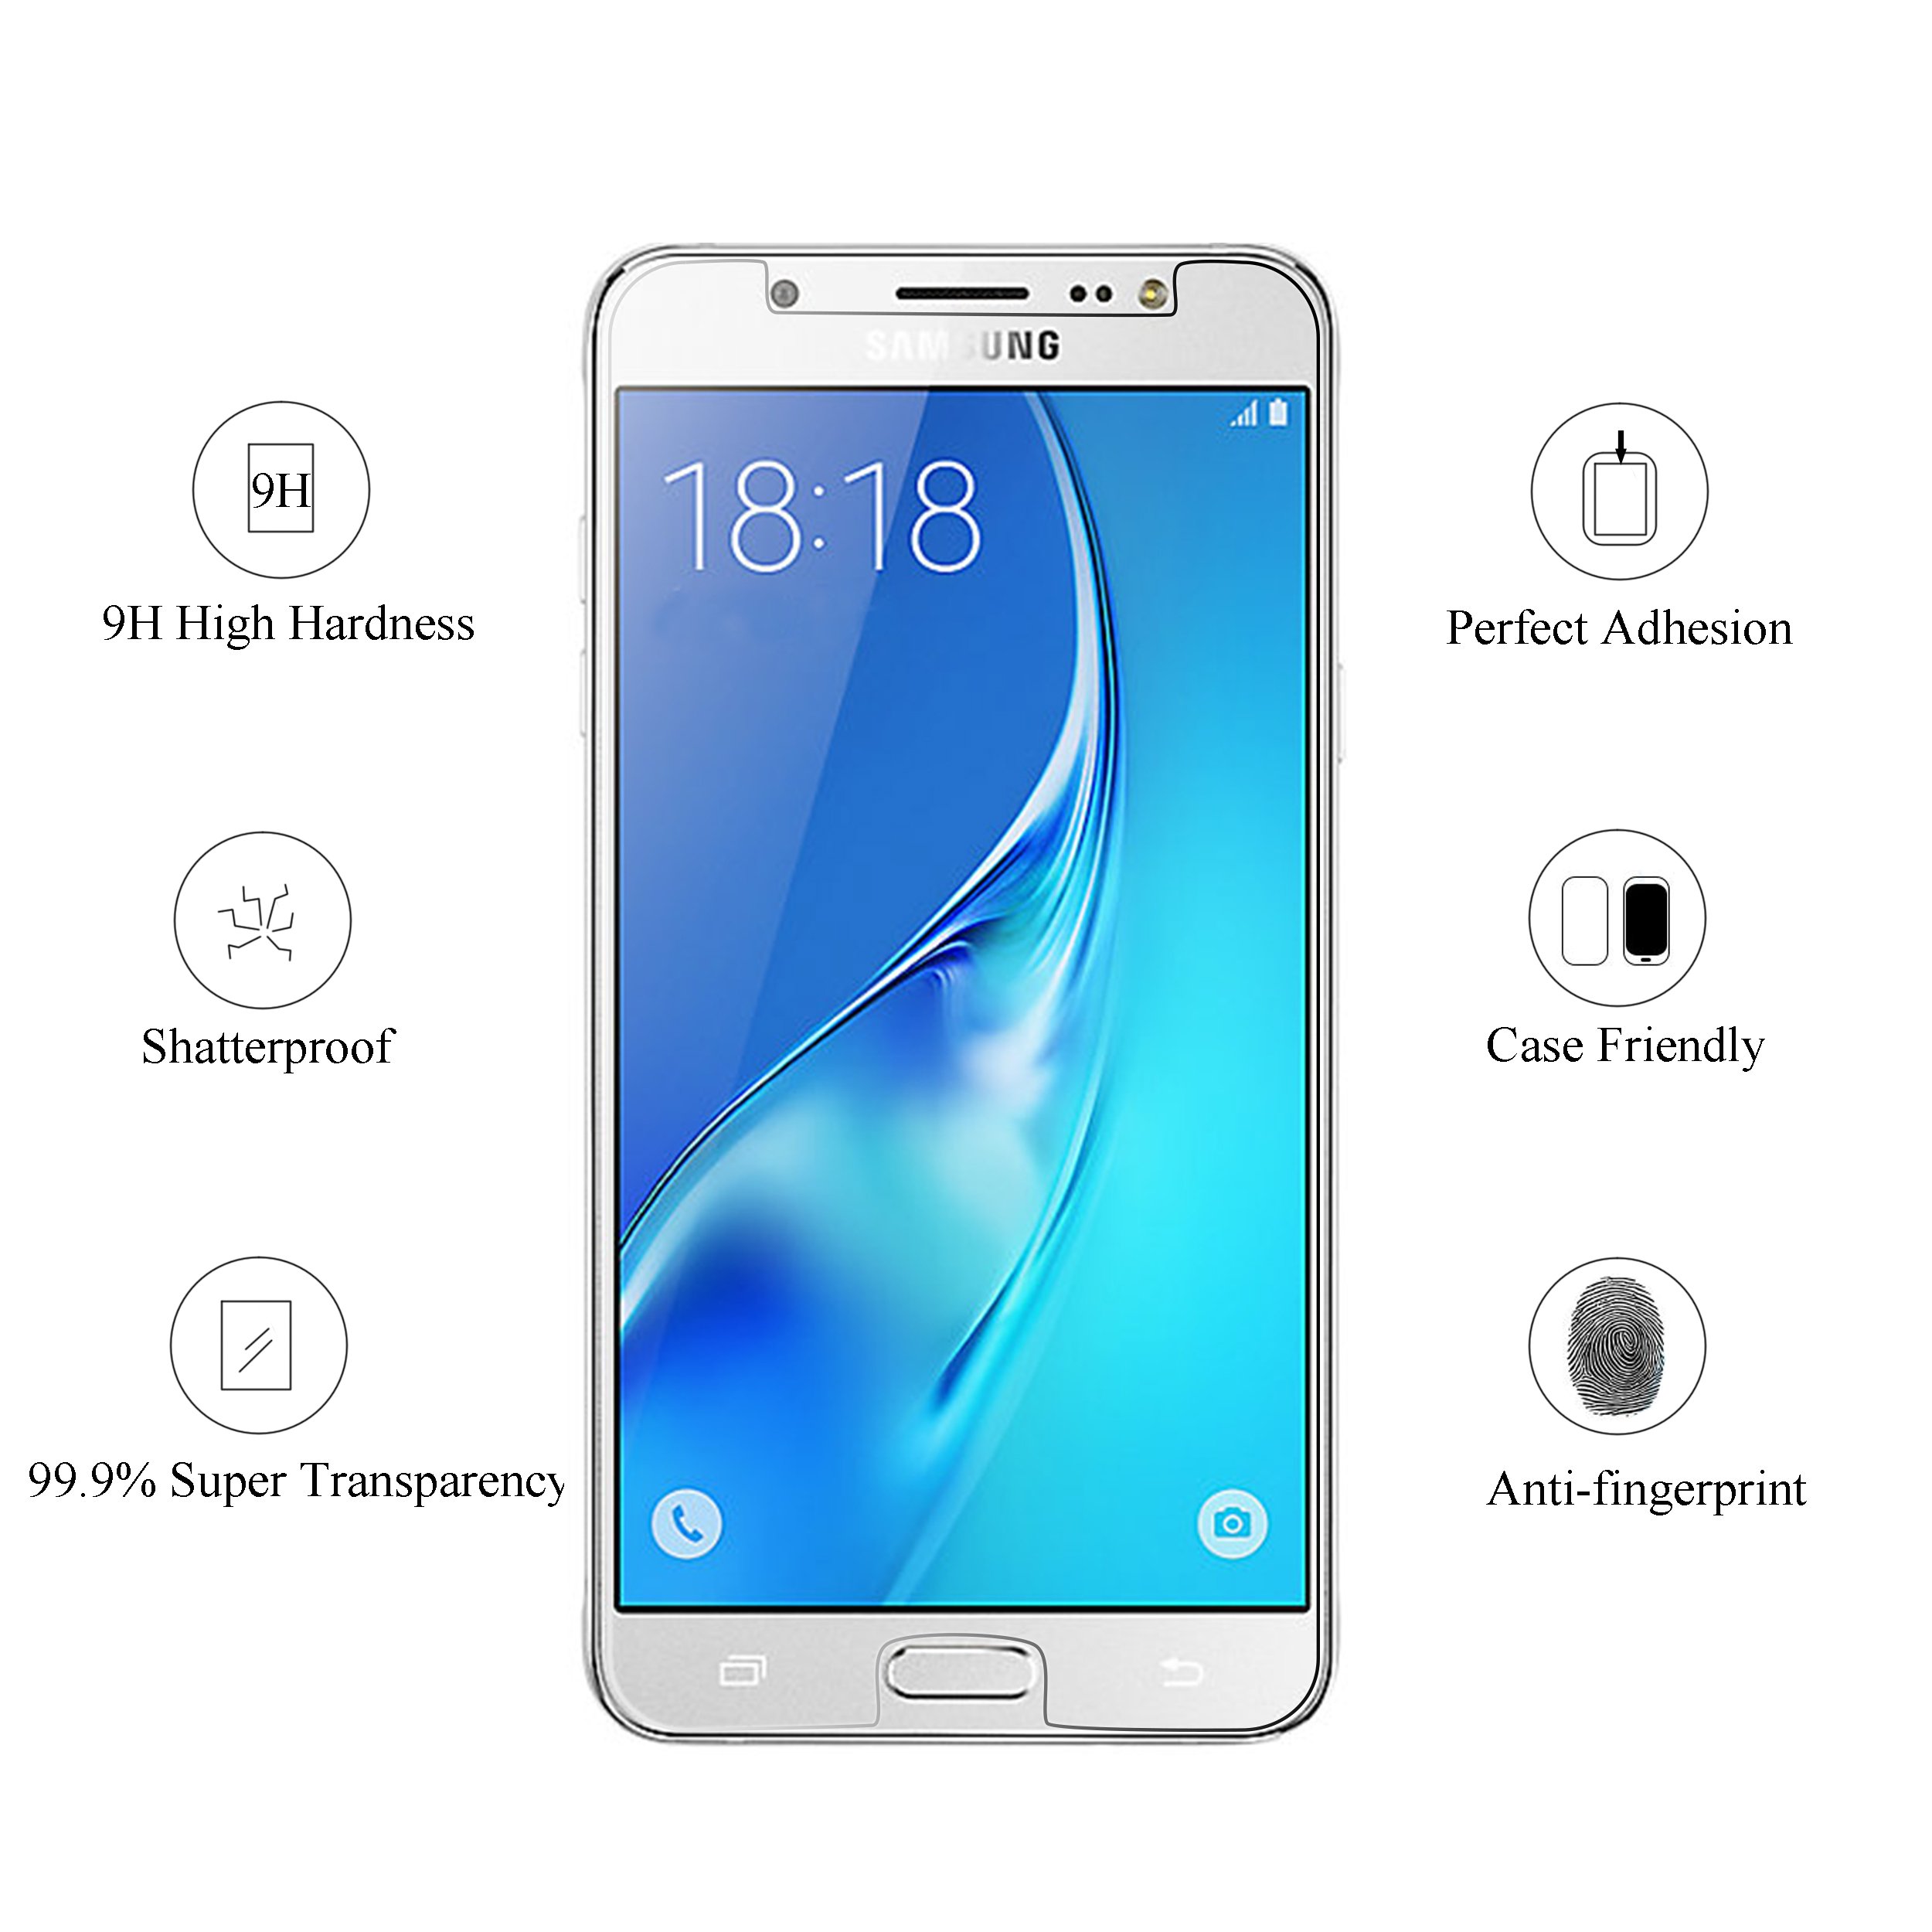 Ailun Screen Protector for Galaxy J7 2018 3Pack Tempered Glass Compatible with Samsung Galaxy J7 J7 Star 2018 J7 V 2nd Gen 2018 J7 Top 2018 J7 Aura 2018 J7 Crown 2018 Case Friendly